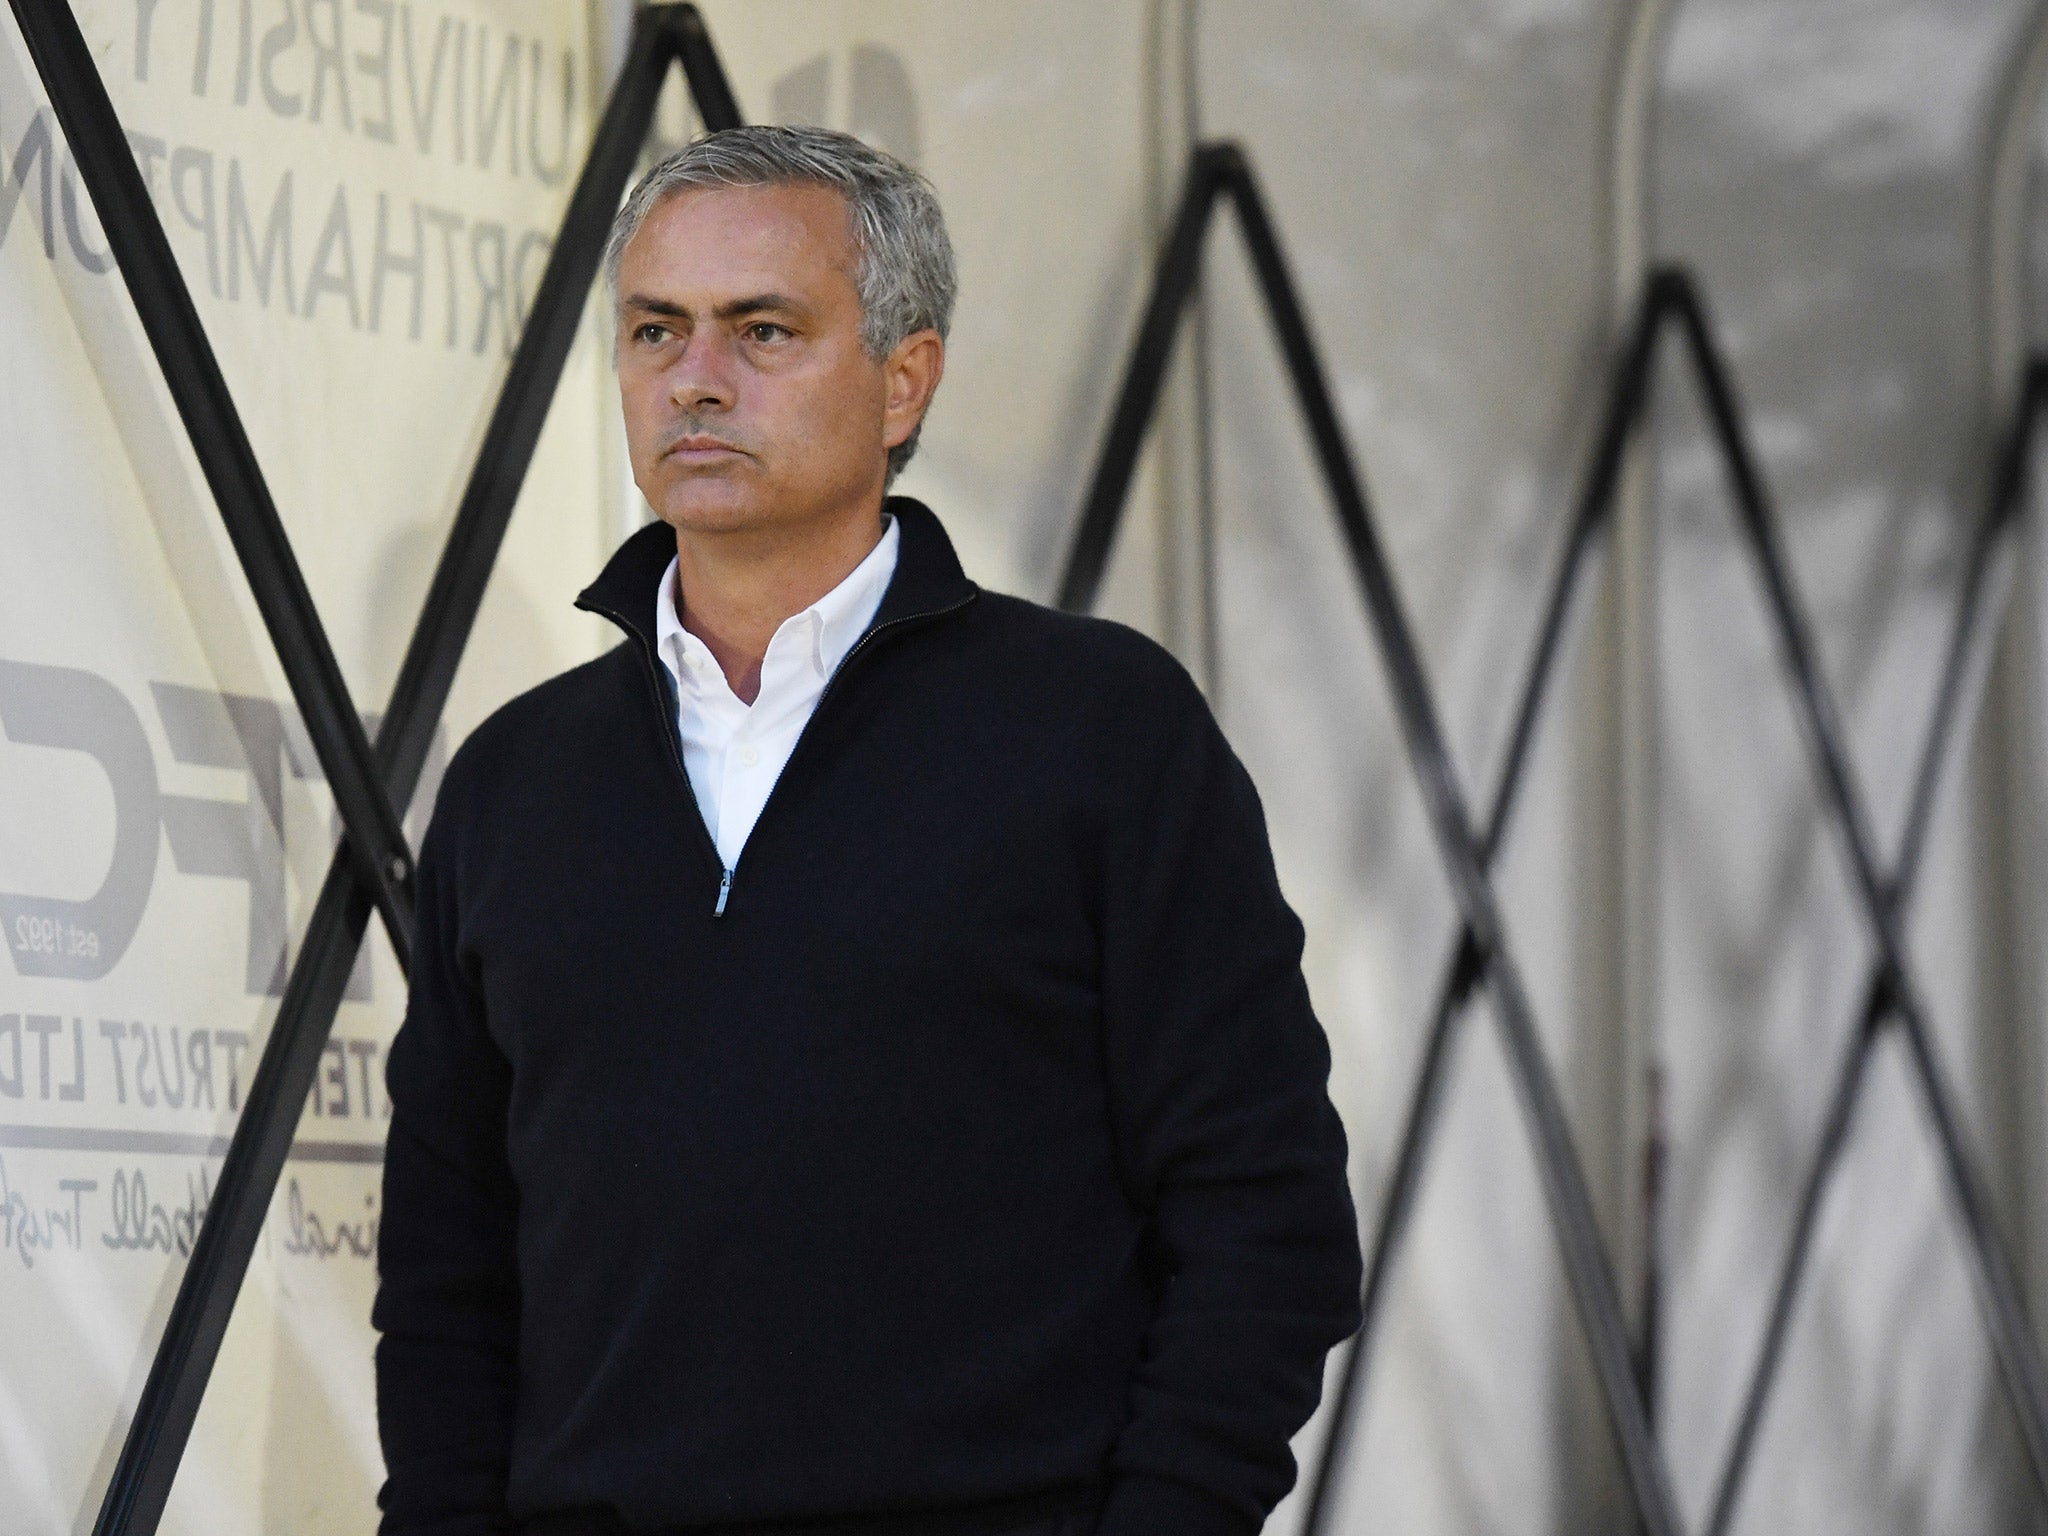 Jose Mourinho chose not to speak to the press after Manchester United's 3-1 victory over Northampton Town